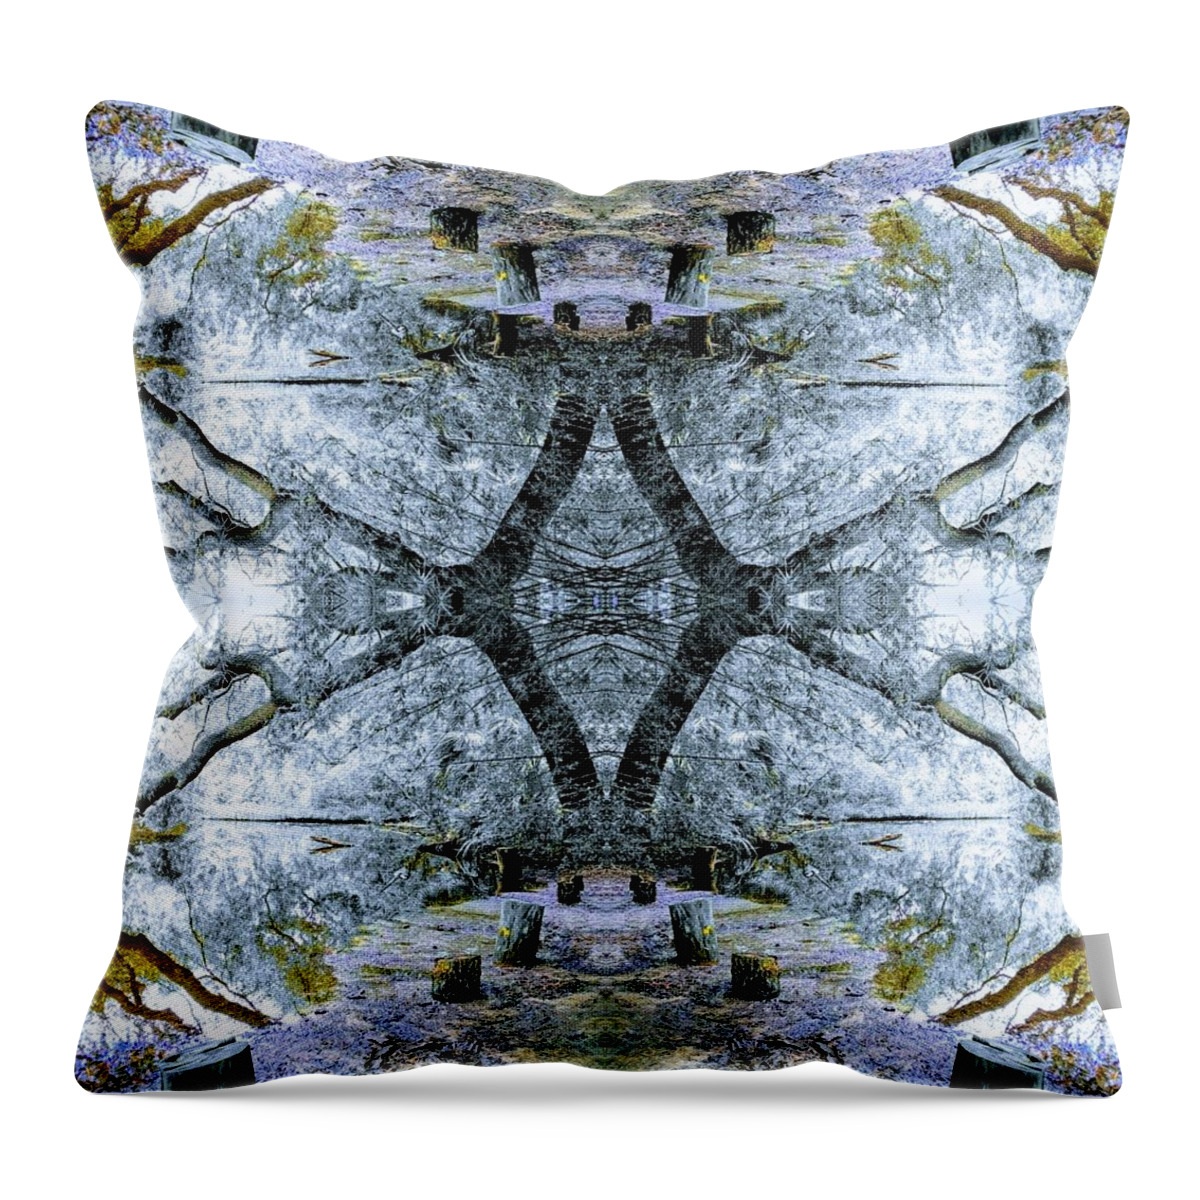 Abstract Throw Pillow featuring the digital art Deciduous Dimensions by Sherry Kuhlkin